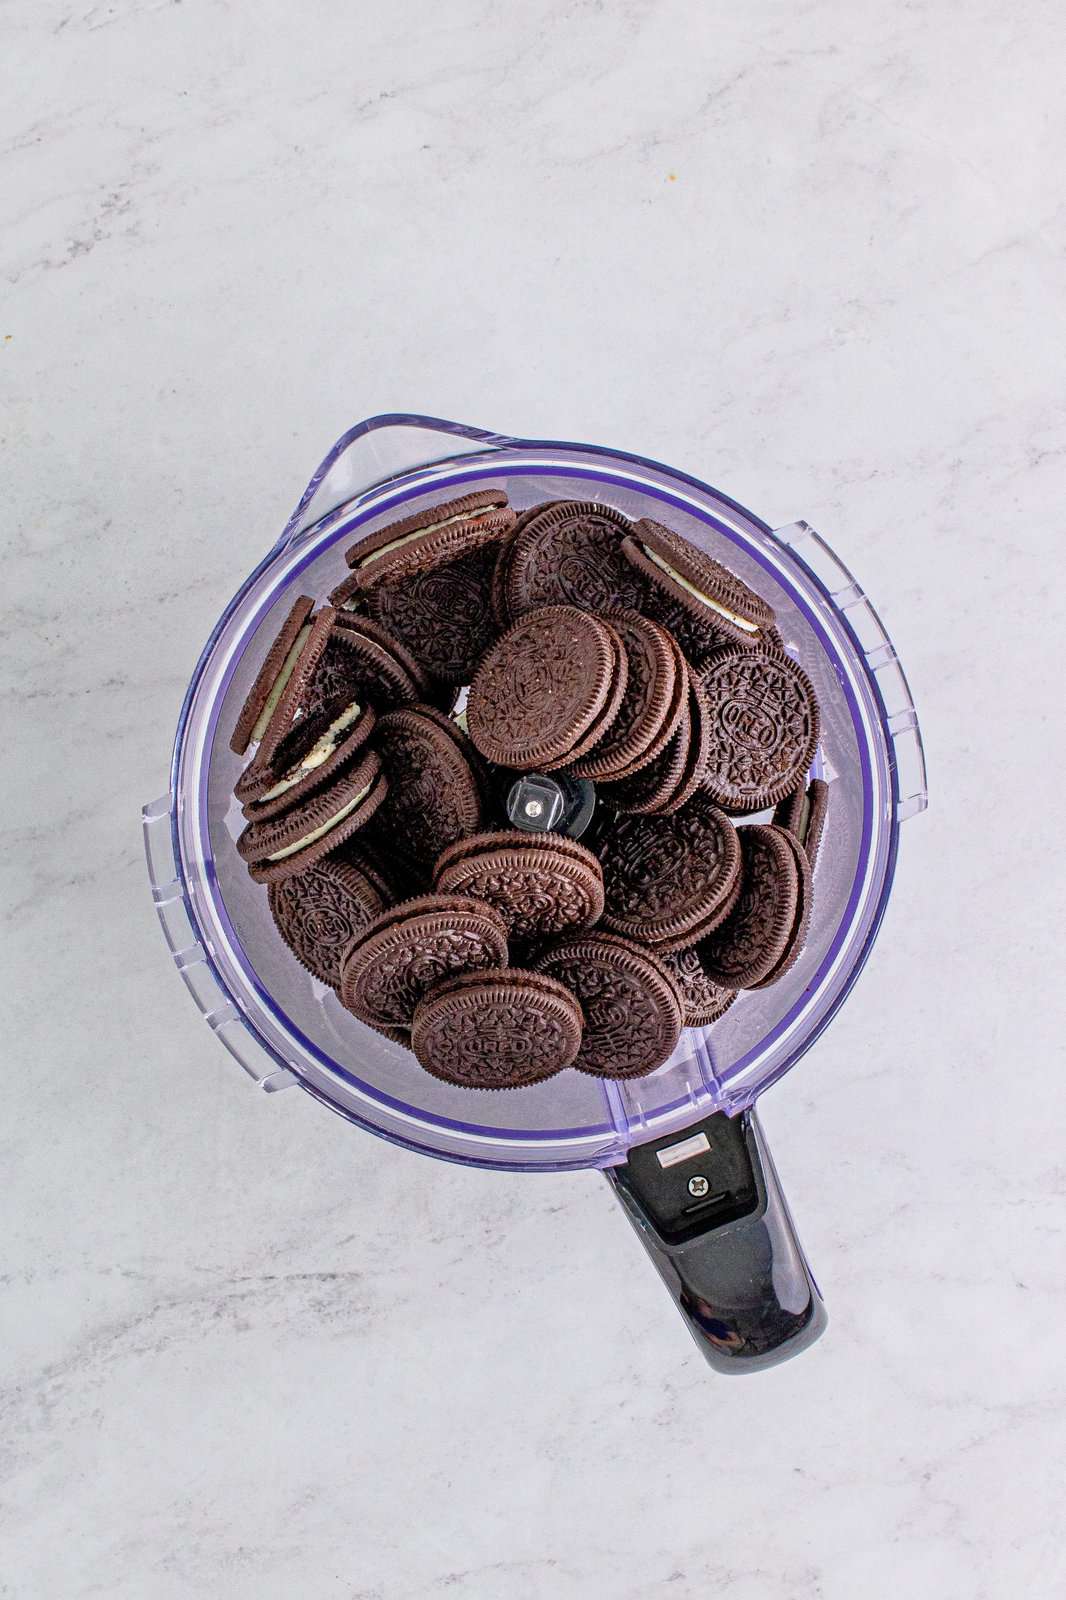 oreo cookies shown in a food processor.